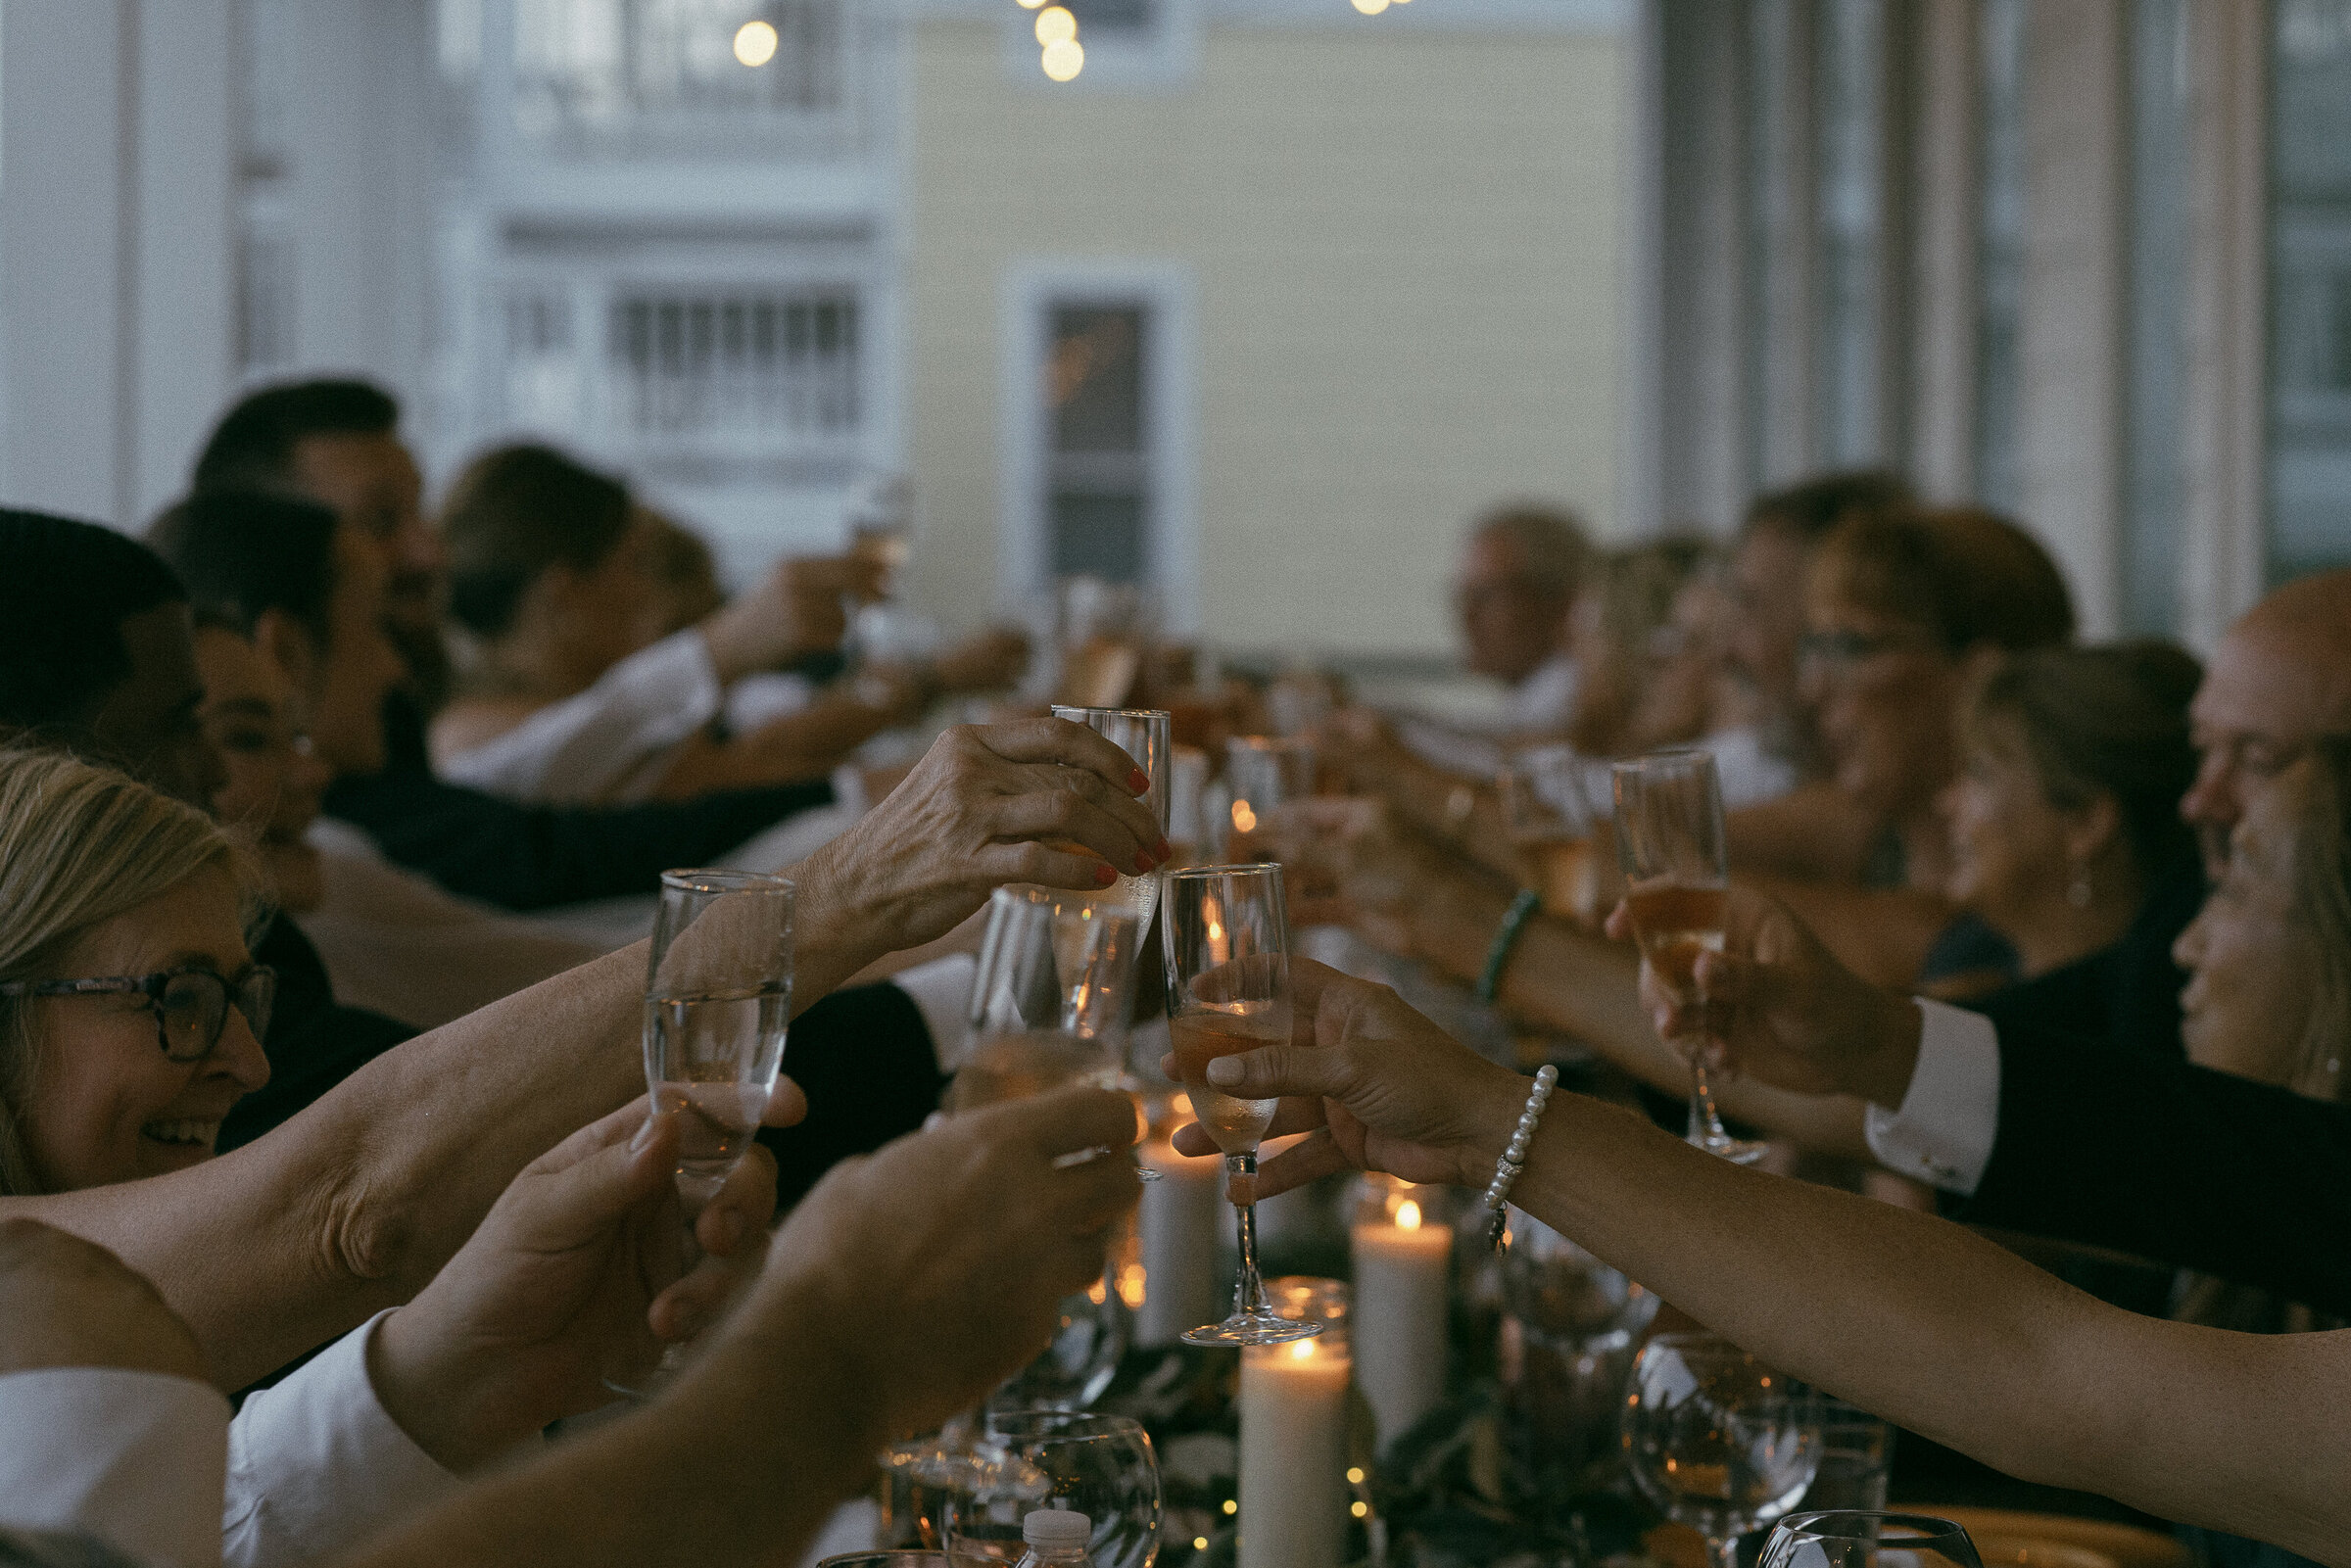 Guests raising glasses for a toast at a dimly lit indoor wedding reception.